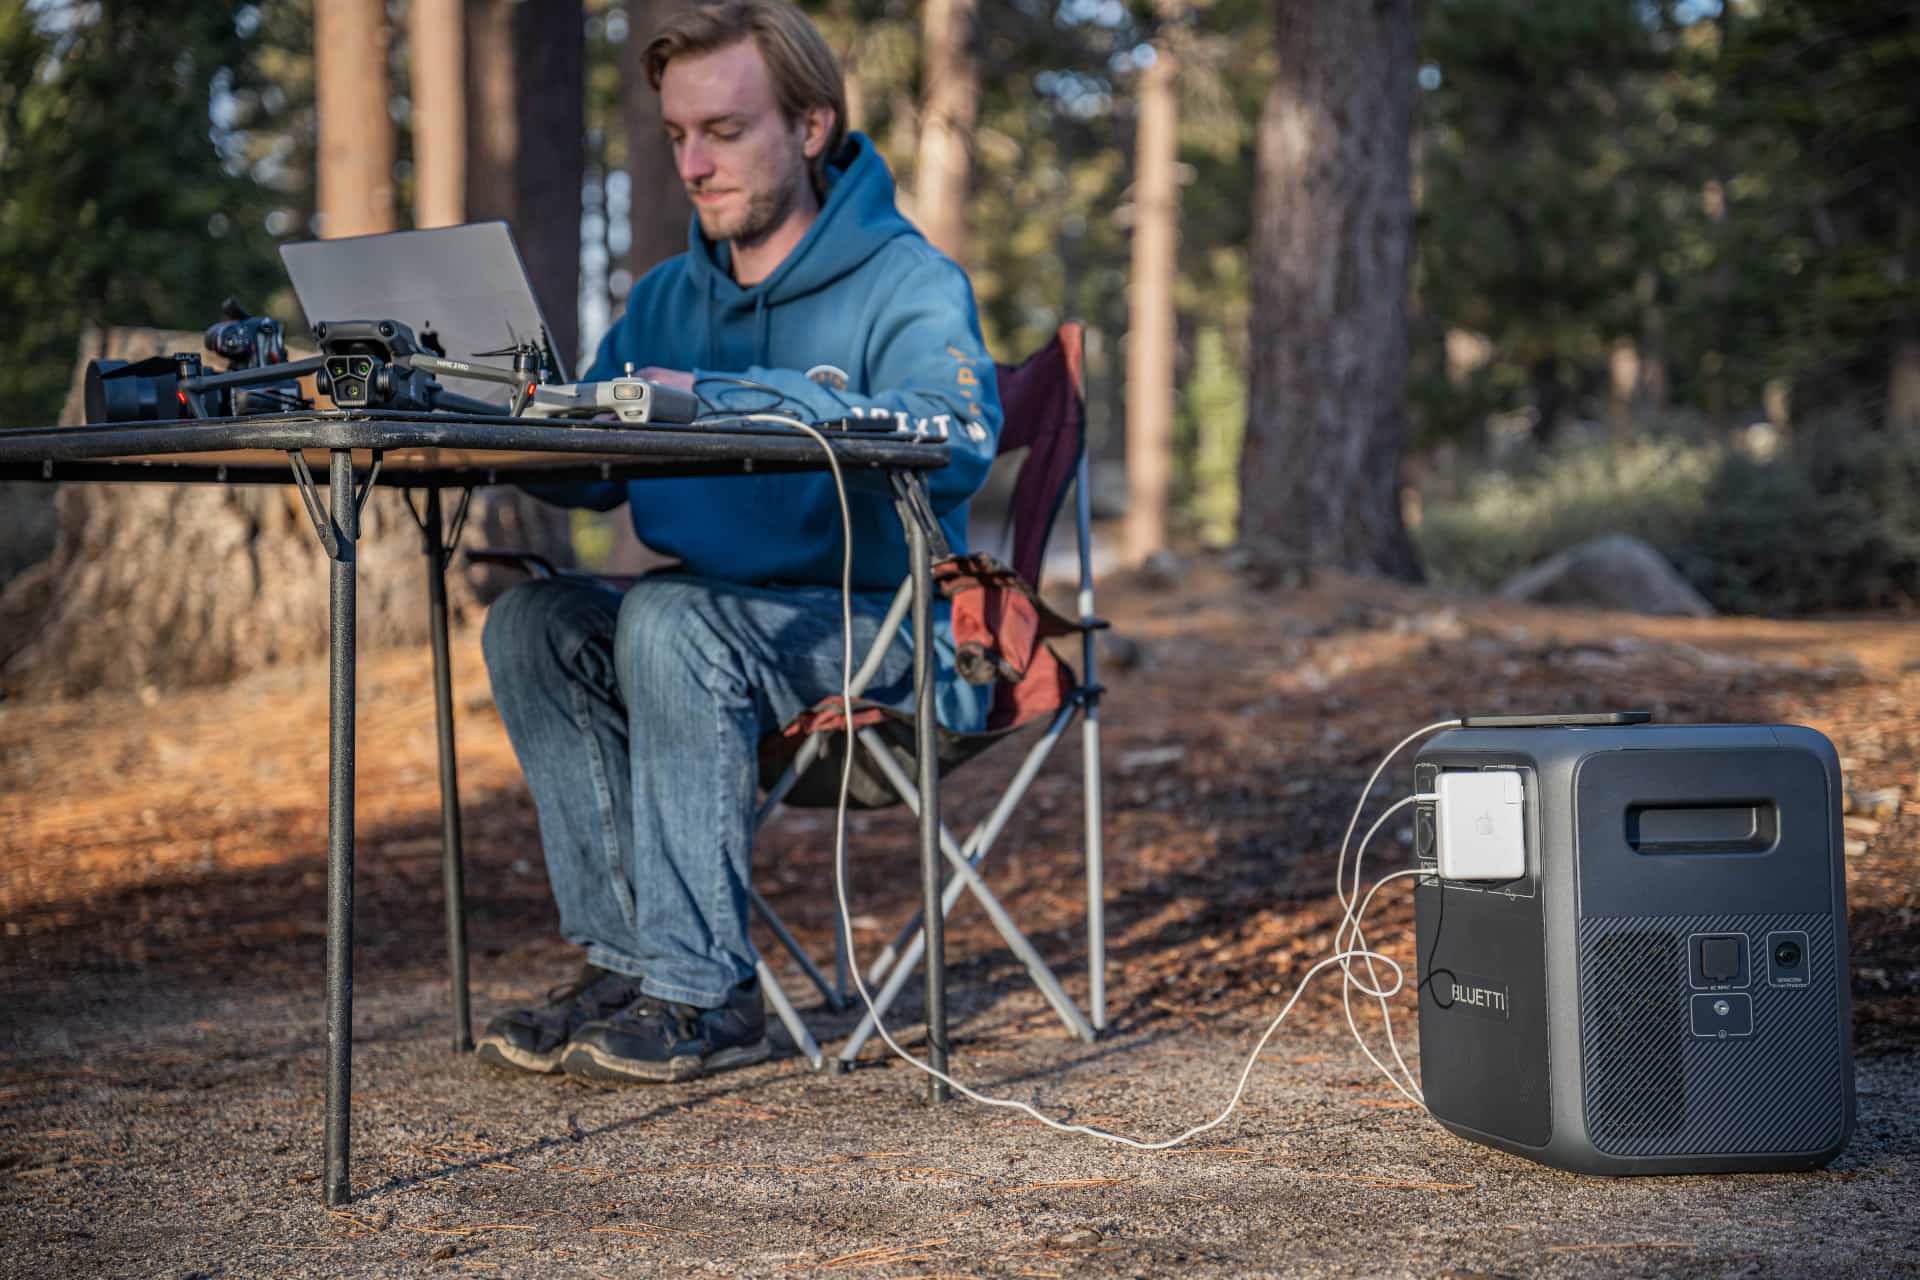 Bluetti SwapSolar Ecosystem is versatile power station for your outdoor adventures with a fridge, freezer and ice maker